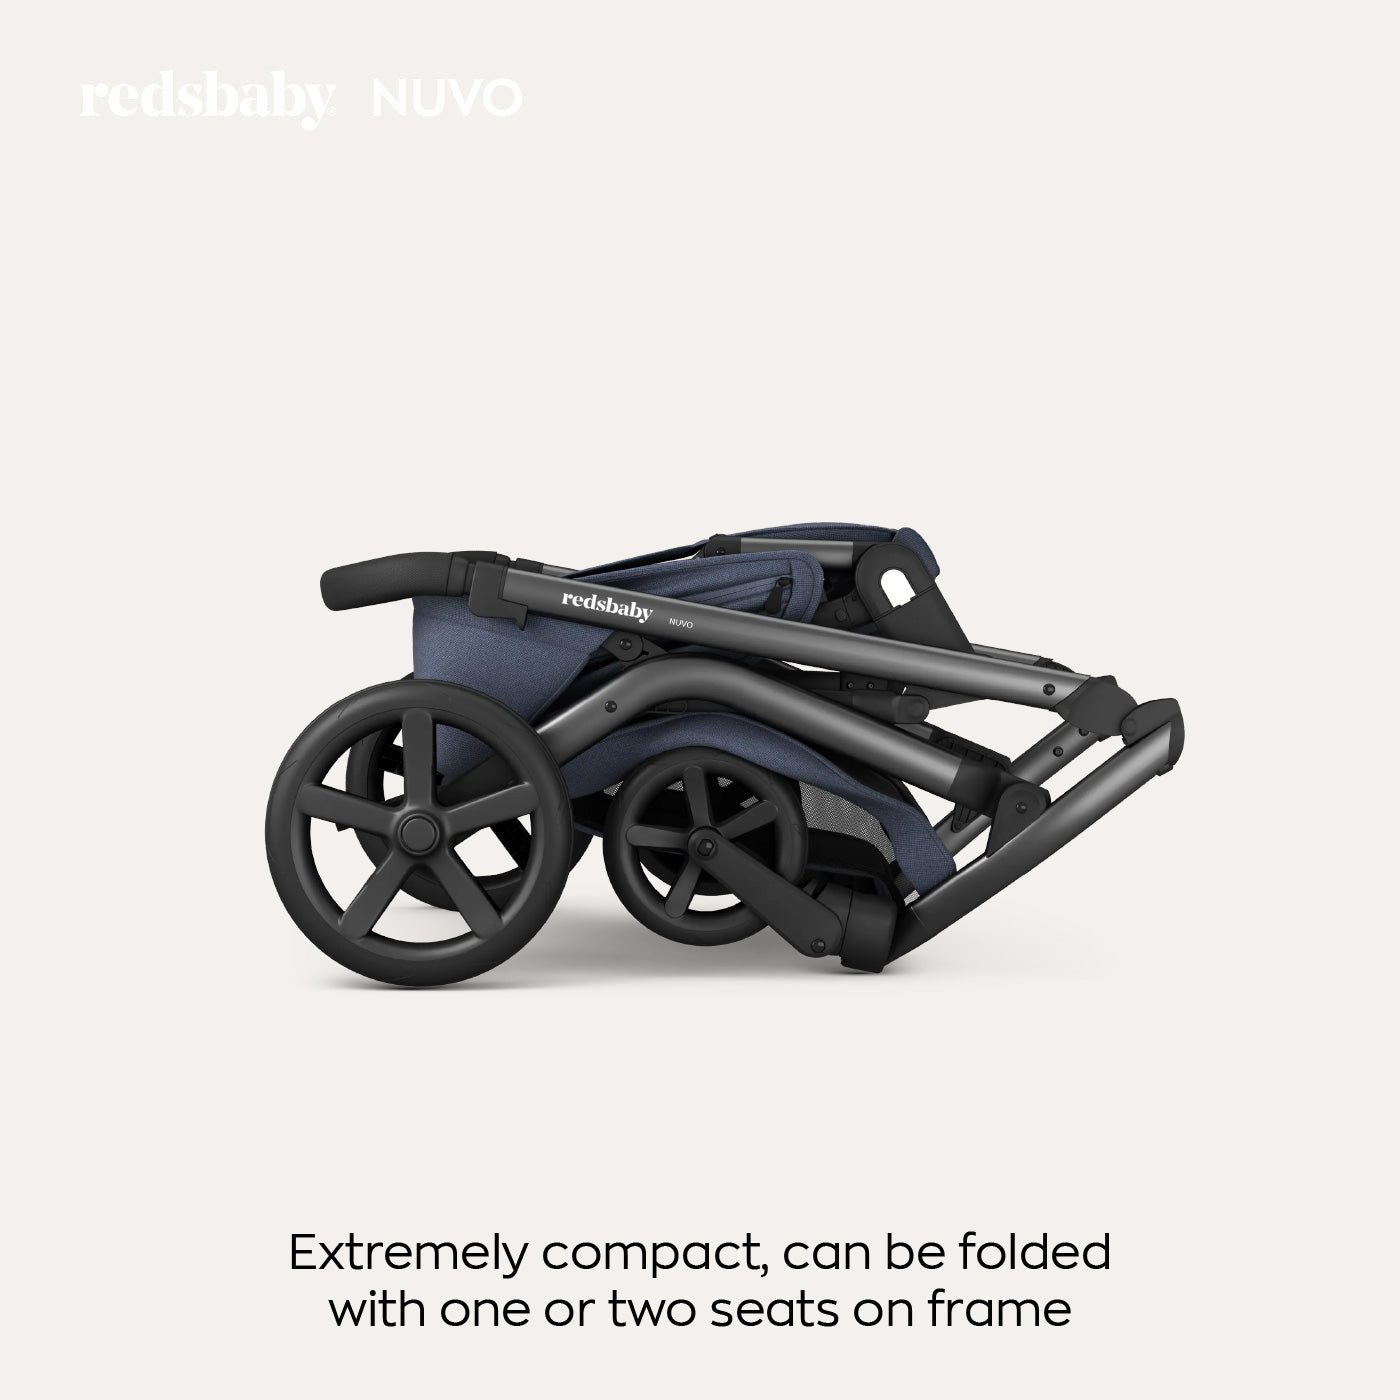 Image of a navy blue stroller folded compactly with the text "reds baby NUVO. Extremely compact, can be folded with one or two seats on frame." The stroller is shown in a folded position, emphasizing its compact design.